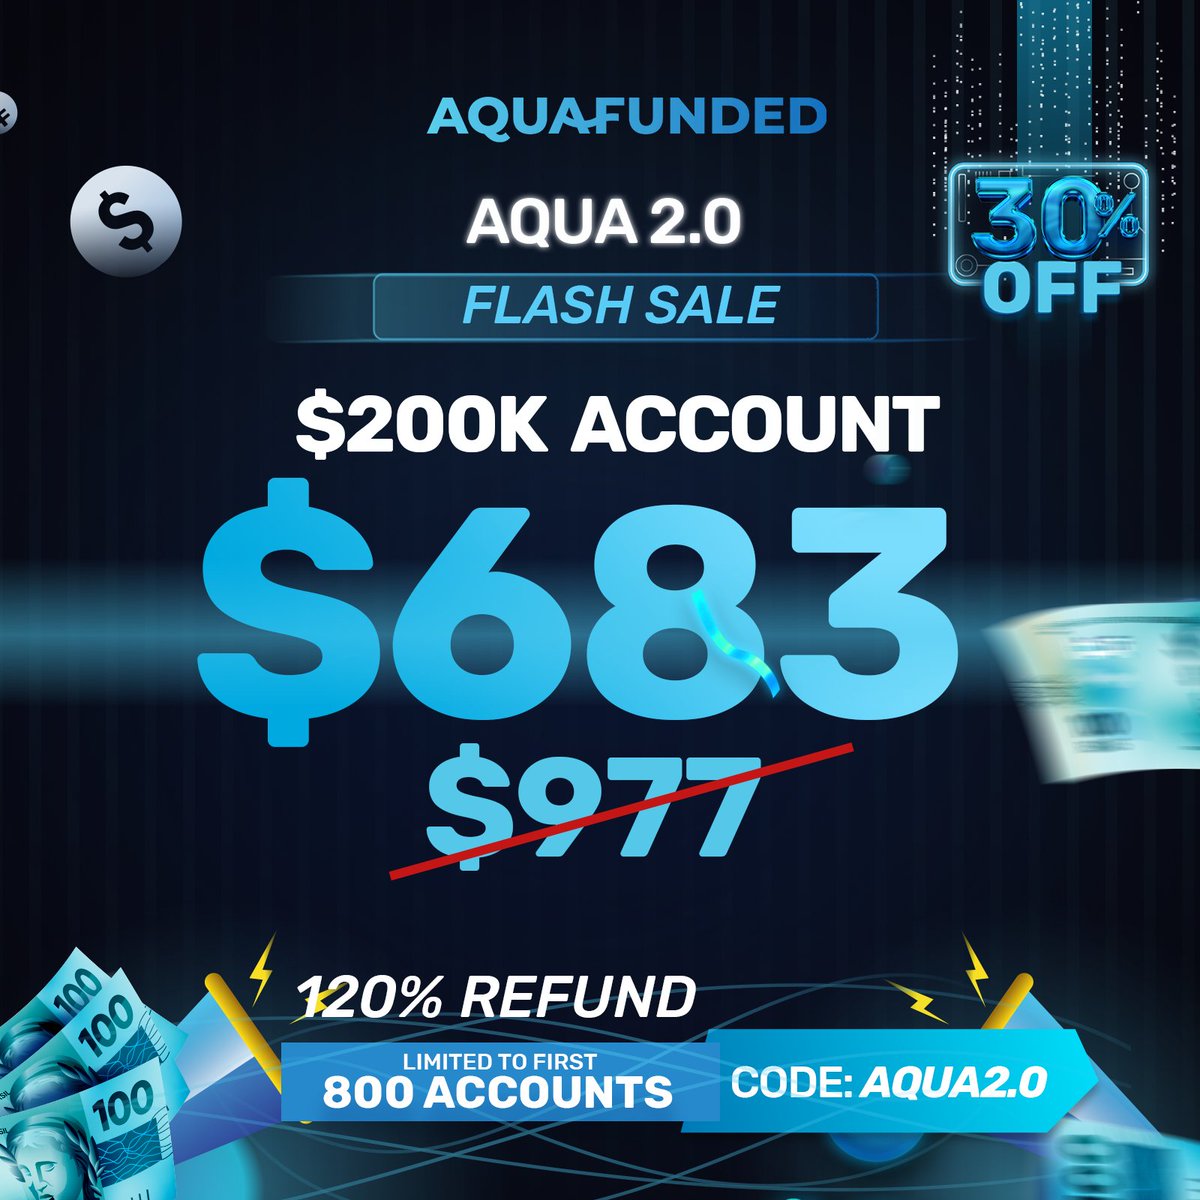 $200k ACCOUNT FOR ONLY $683 🥶 aquafunded.com/?el=x Limited Time SALE! ⏳ Exclusive 30% OFF Discount 💙 120% Refund 💙 90% Profit Split